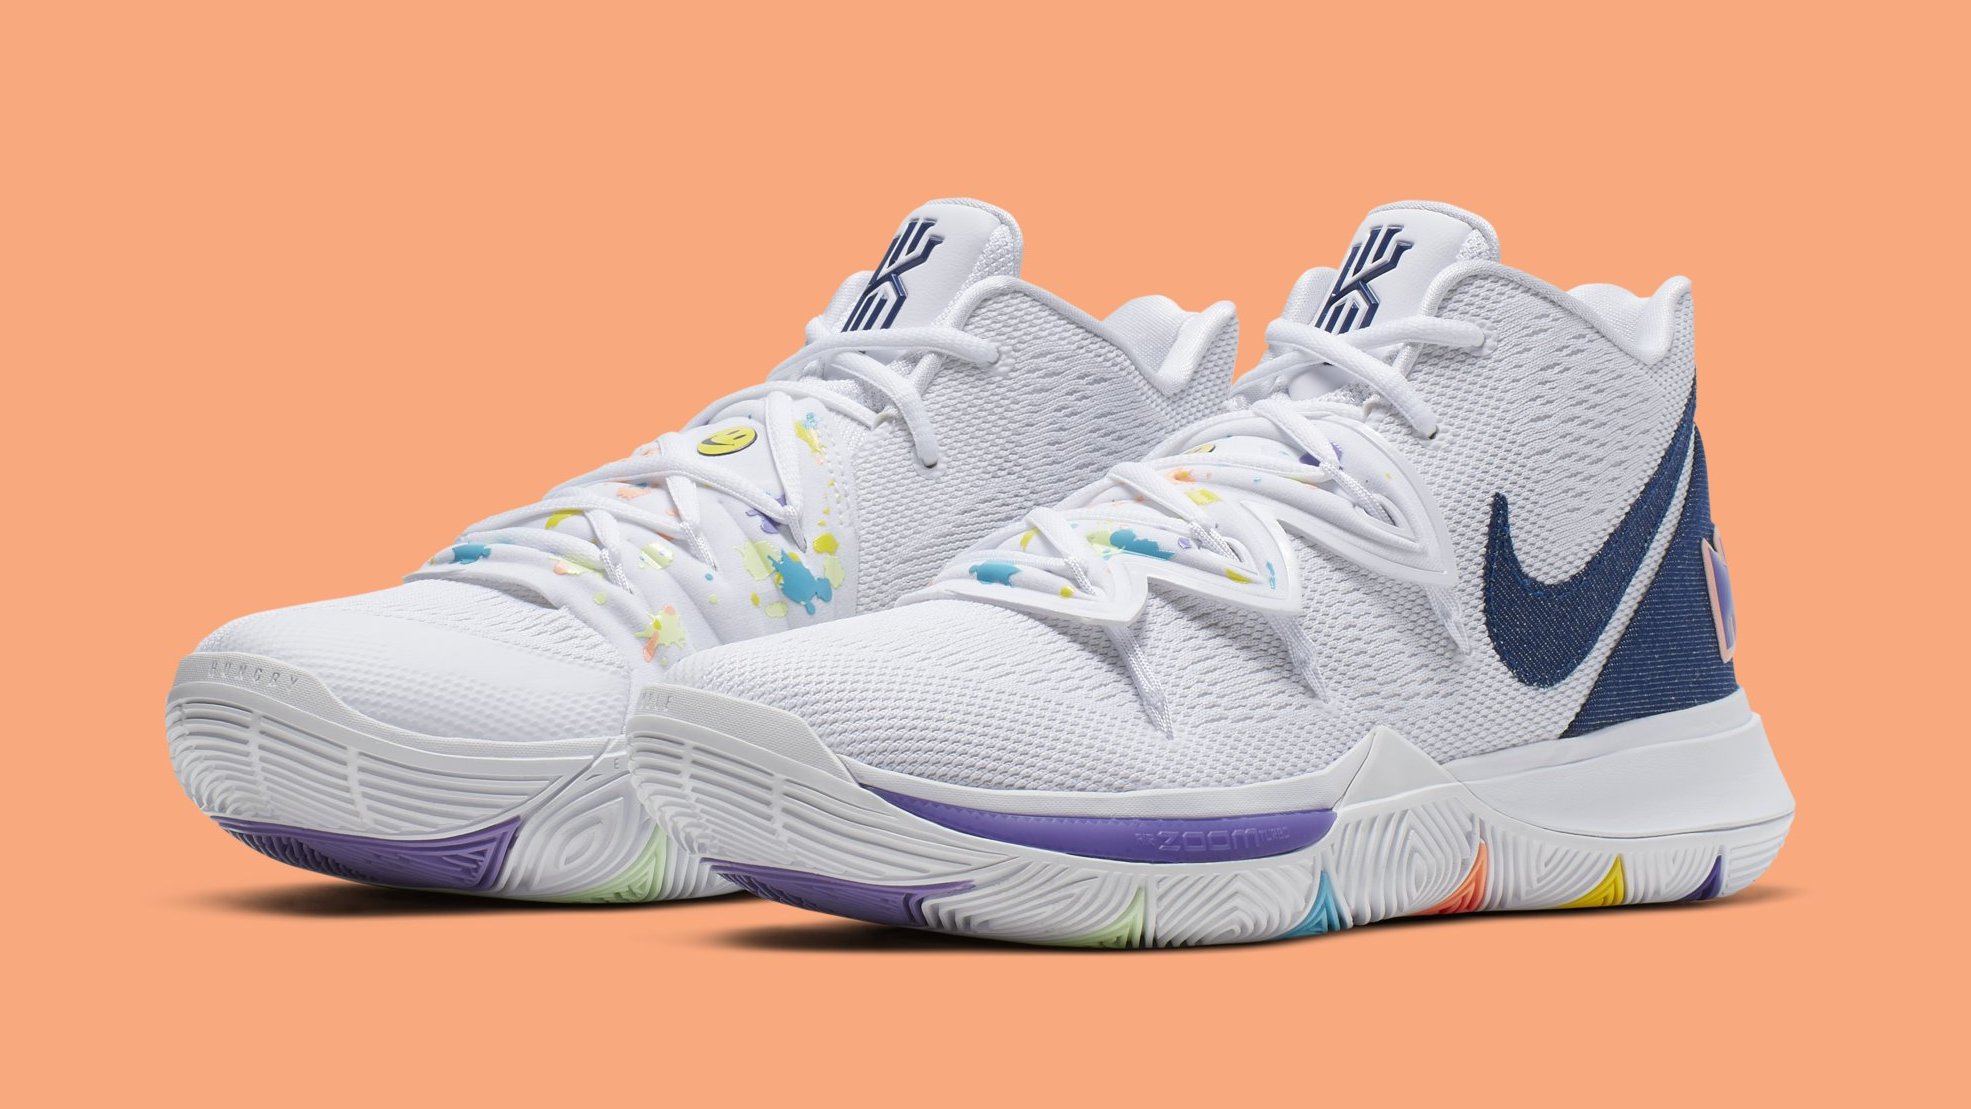 have a nike day kyrie 5